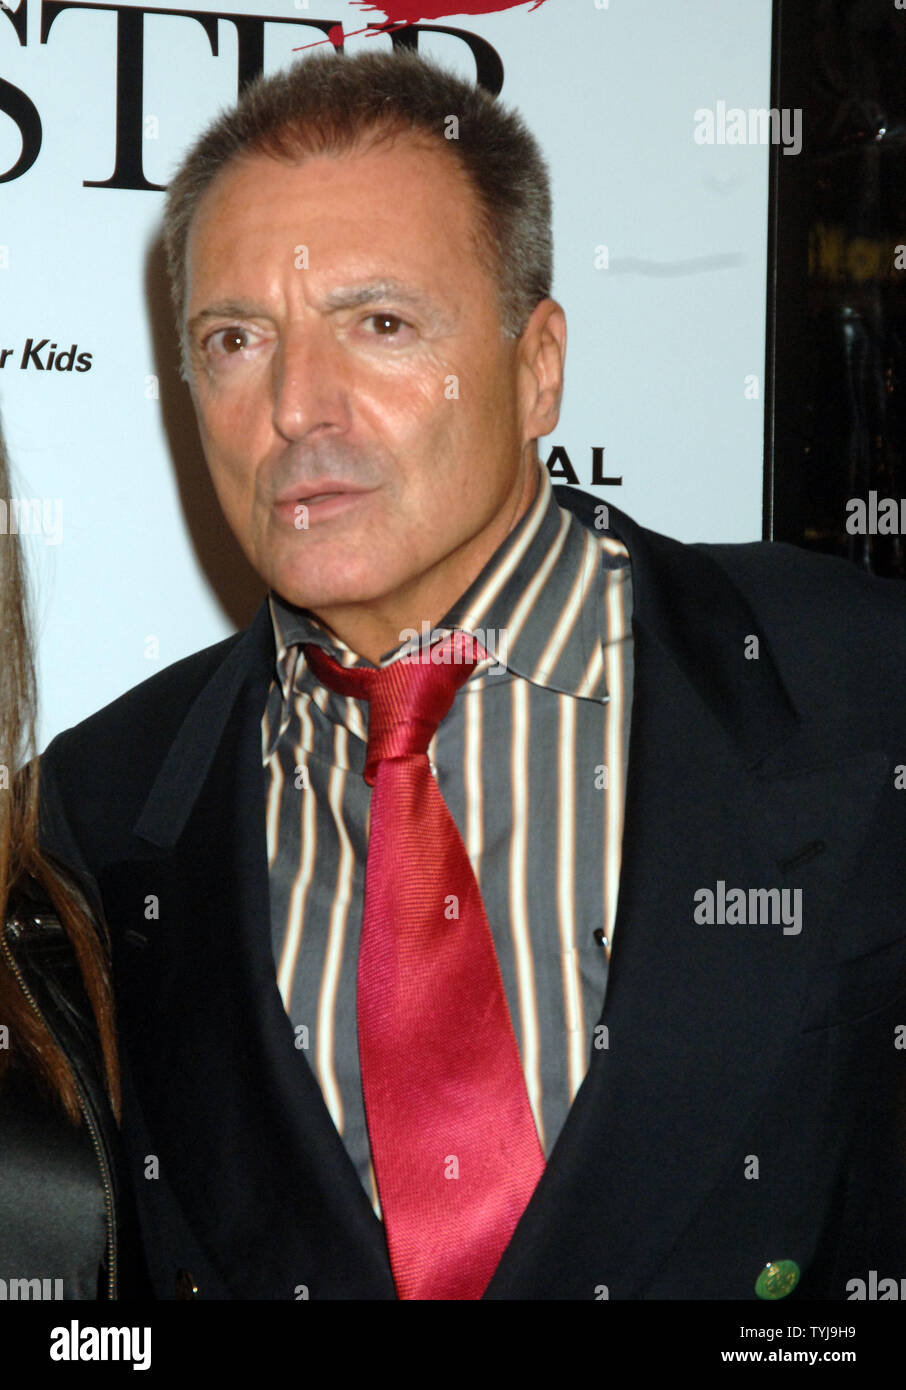 Actor Armand Assante attends the world premiere for her new film American Gangster at New York's Apollo theater on October 19, 2007.    (UPI Photo/Ezio Petersen) Stock Photo